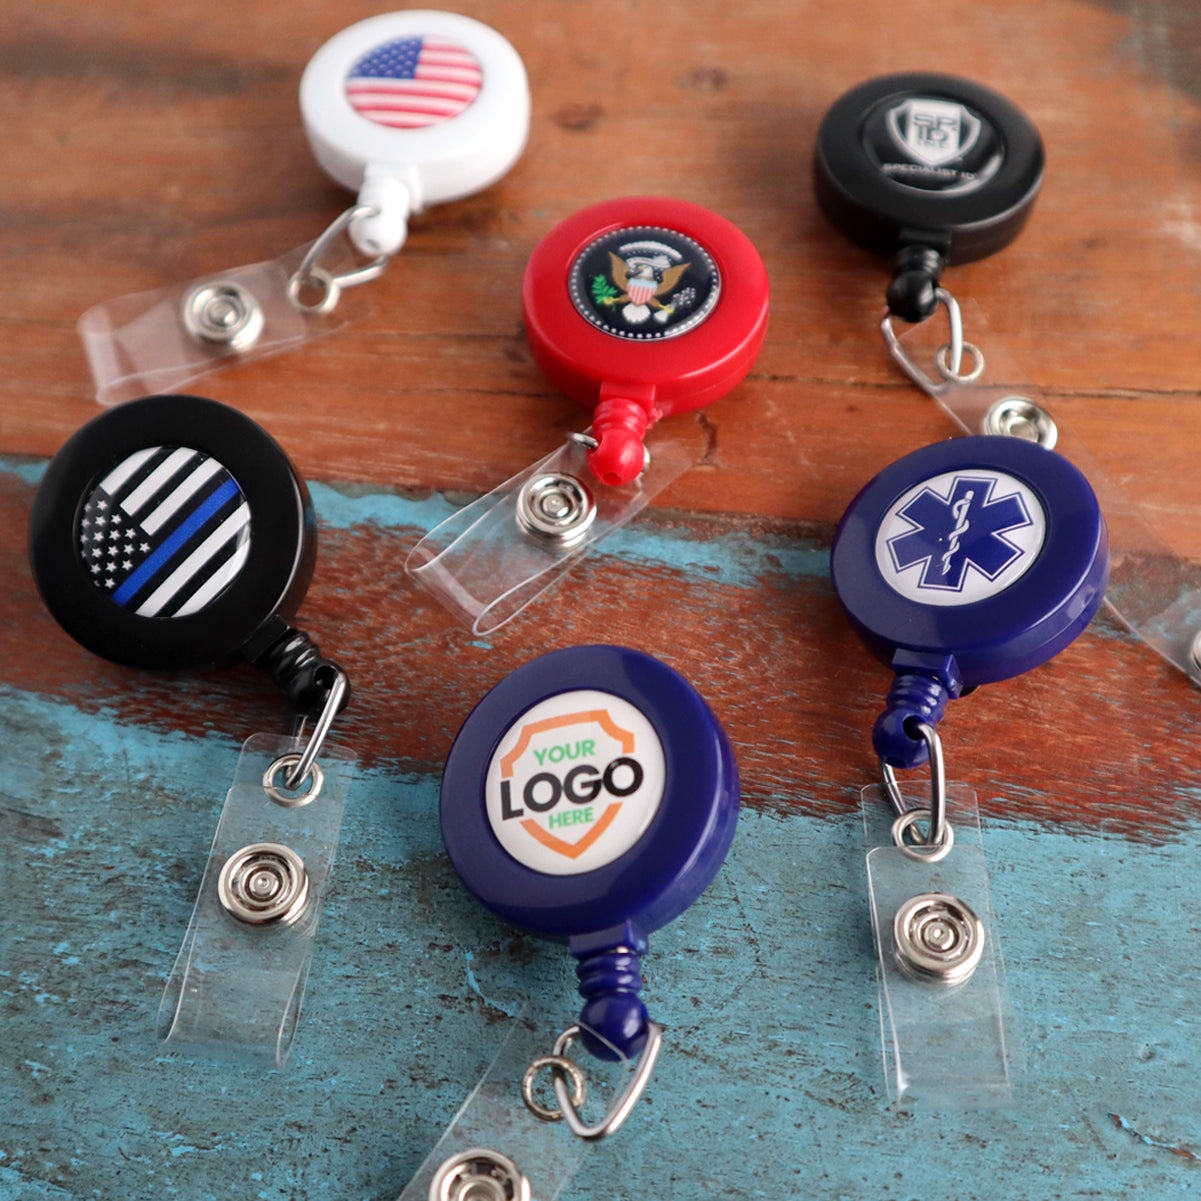 Various Custom Printed Retractable Badge Reels With Belt Clip - Personalize with Your Brand Logo on a wooden surface, featuring designs such as an American flag, medical symbol, and customizable logo with full color graphics to promote brand awareness.